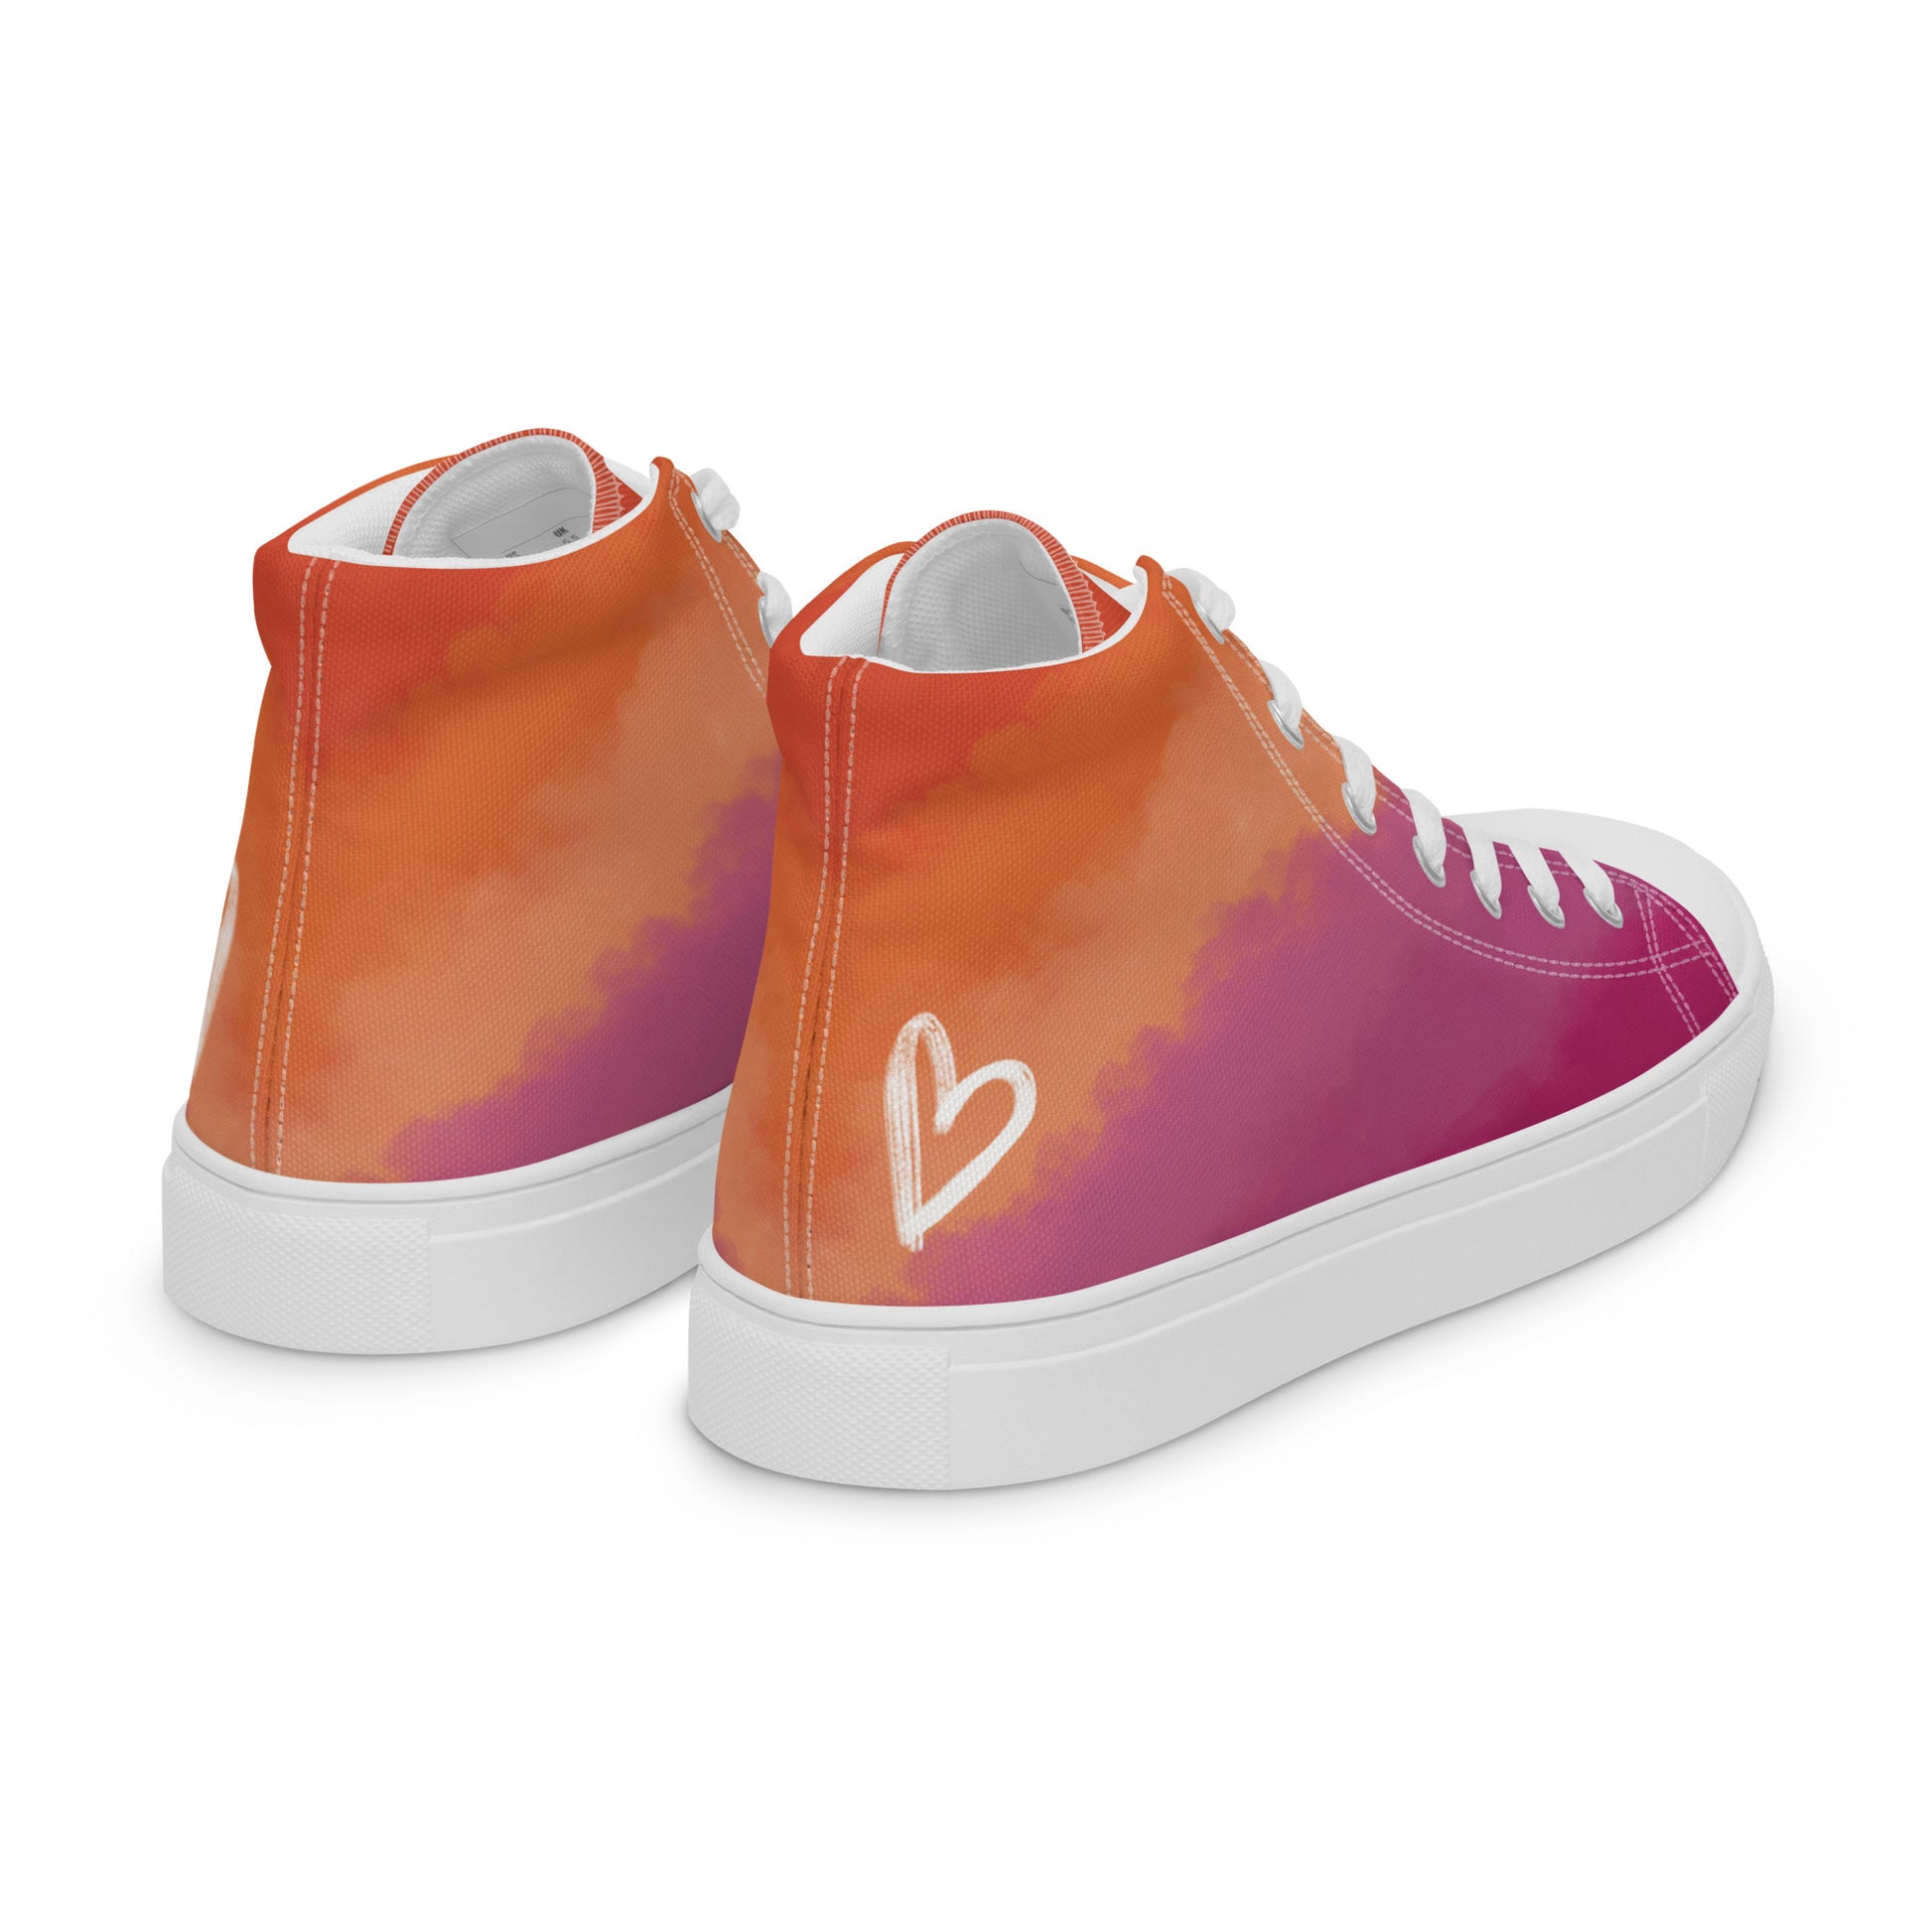 Right back view: A pair of high top shoes with cloud layers in the lesbian flag colors, a white heart on the heel, and the Aras Sivad Studio logo on the tongue.